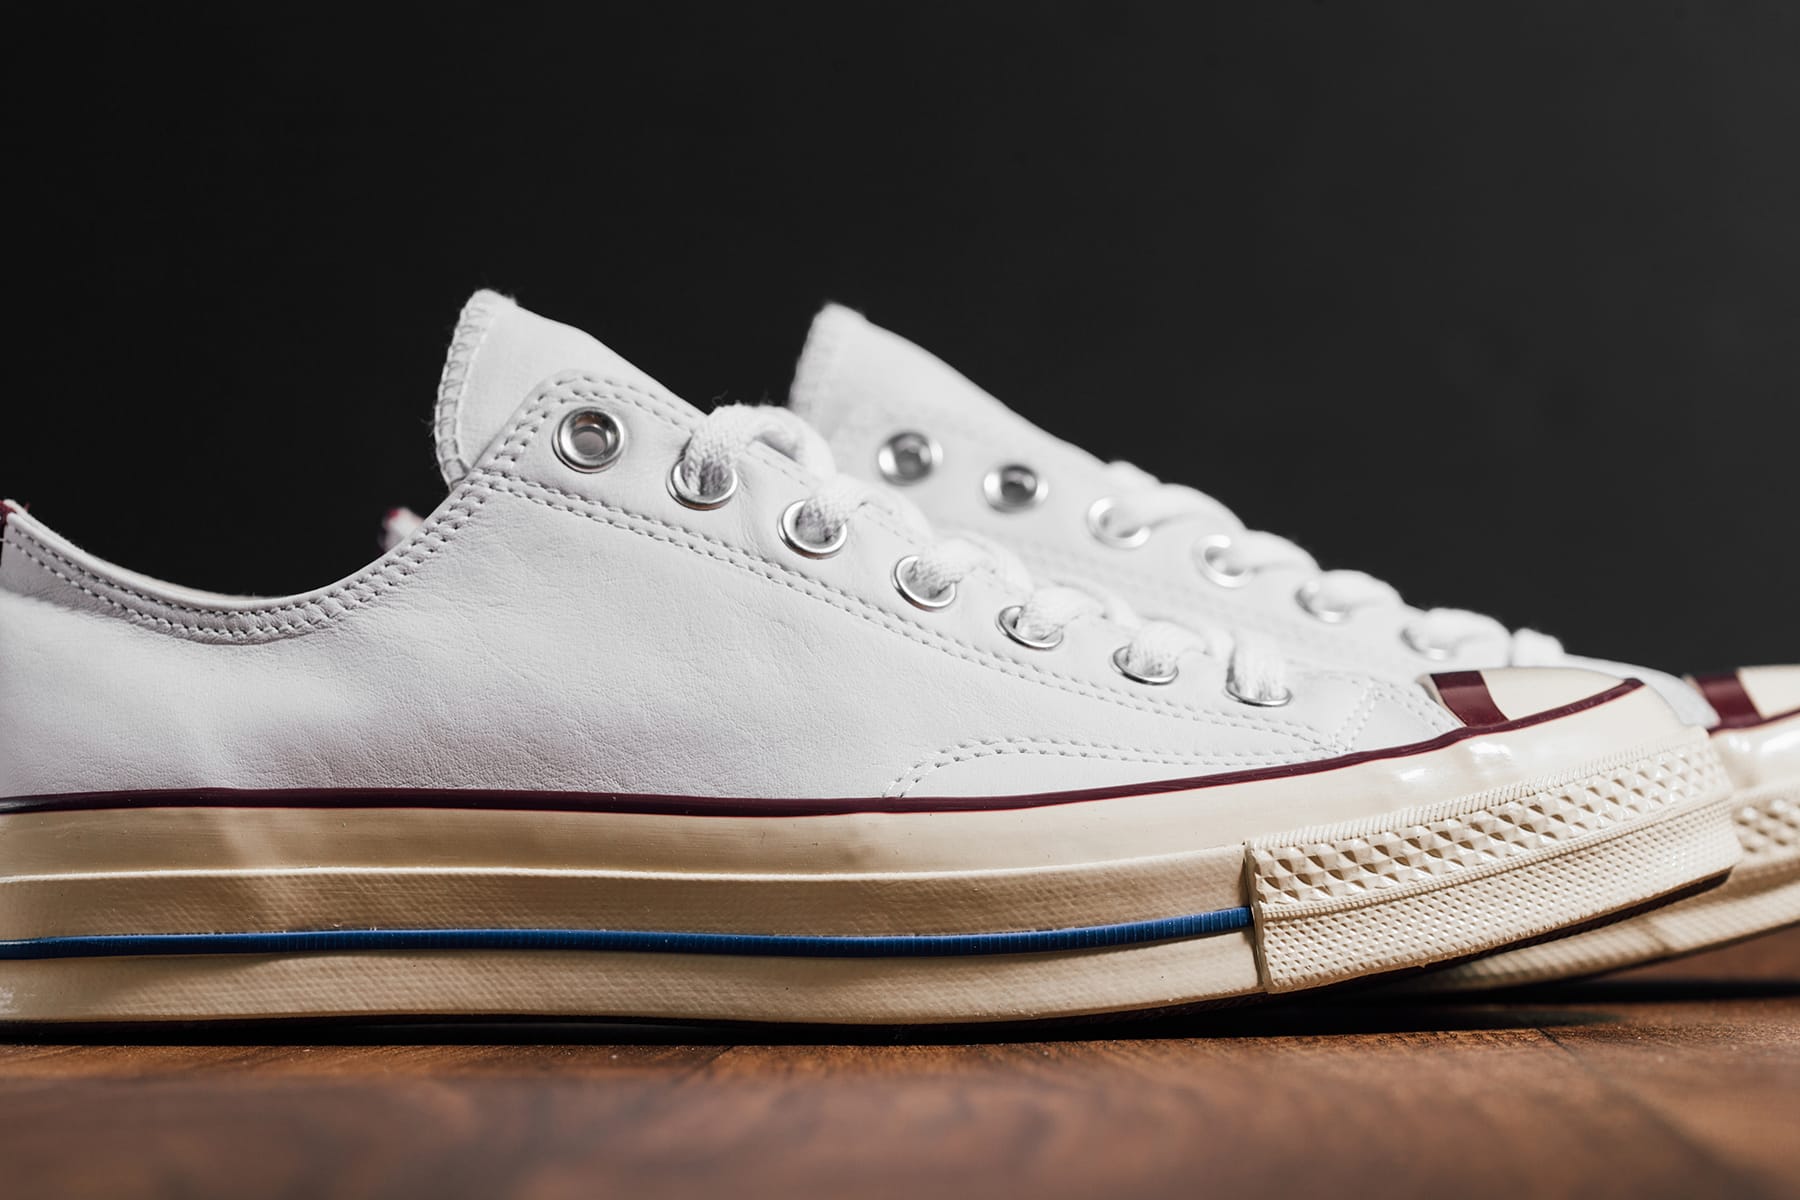 chuck taylor all star leather